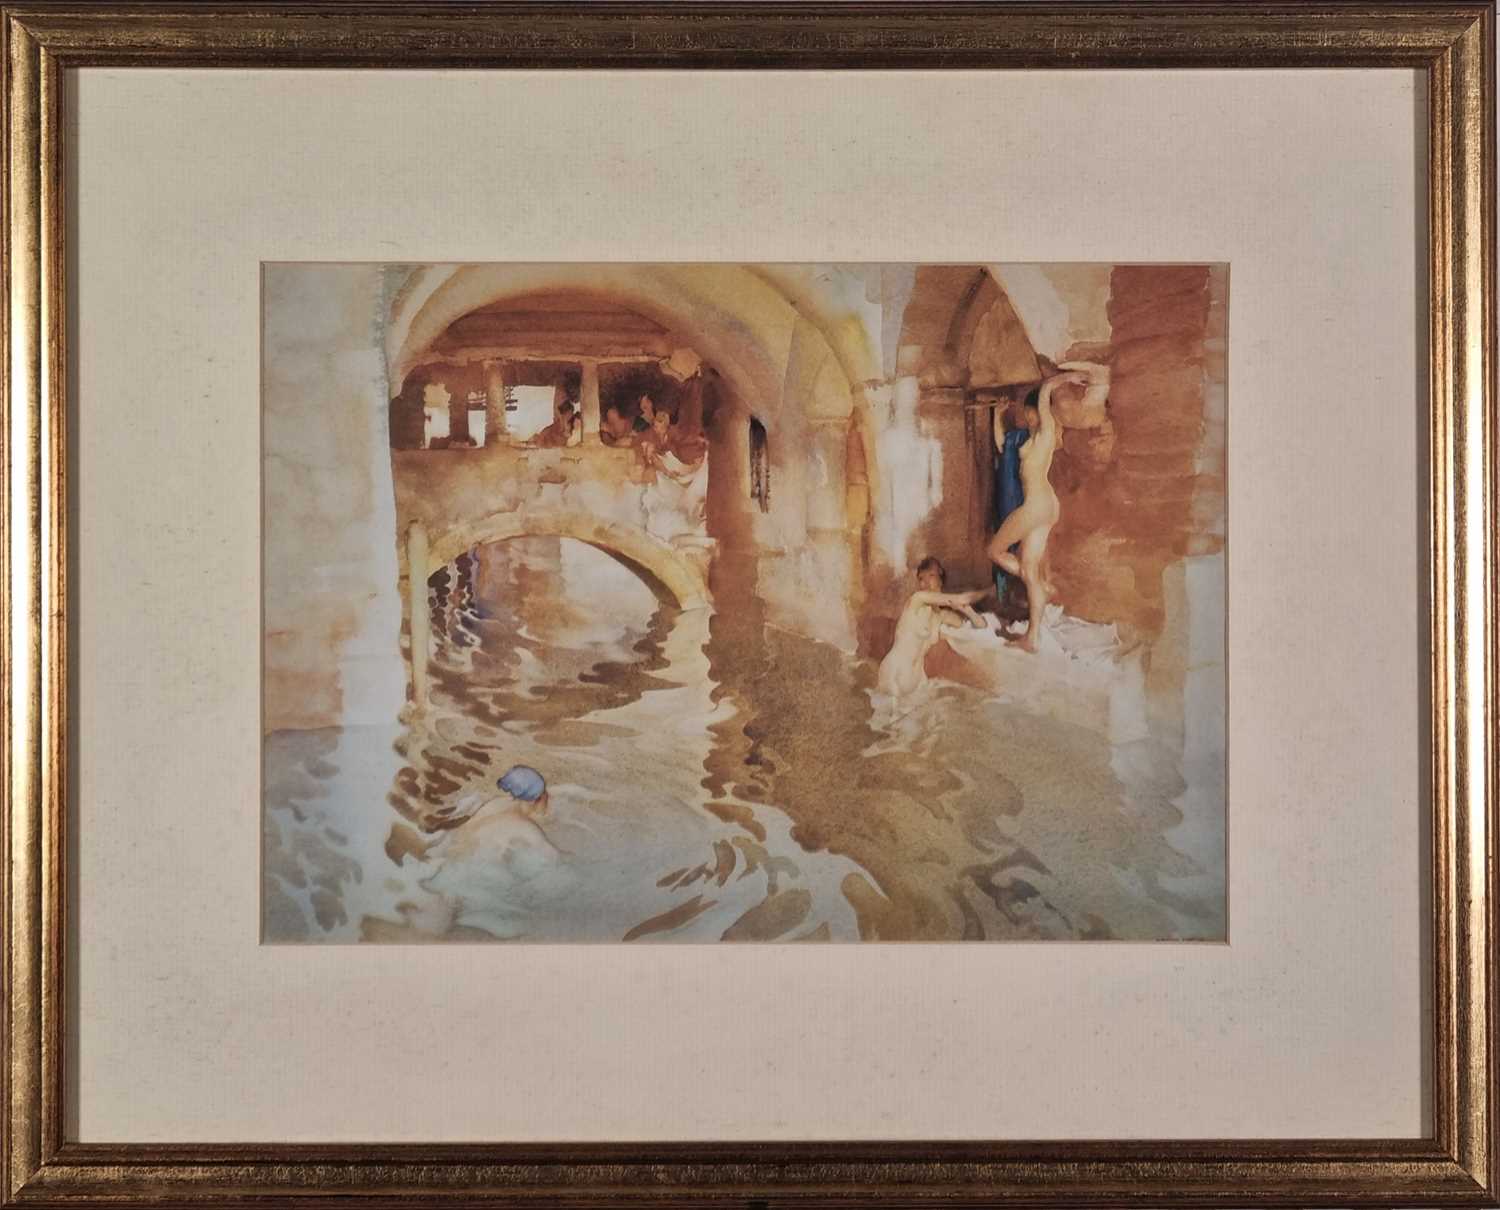 ƚ Sir William Russell FLINT (British 1880-1969) Water Arches, Colour print, 9.75" x 13.75" (24cm x - Image 8 of 9